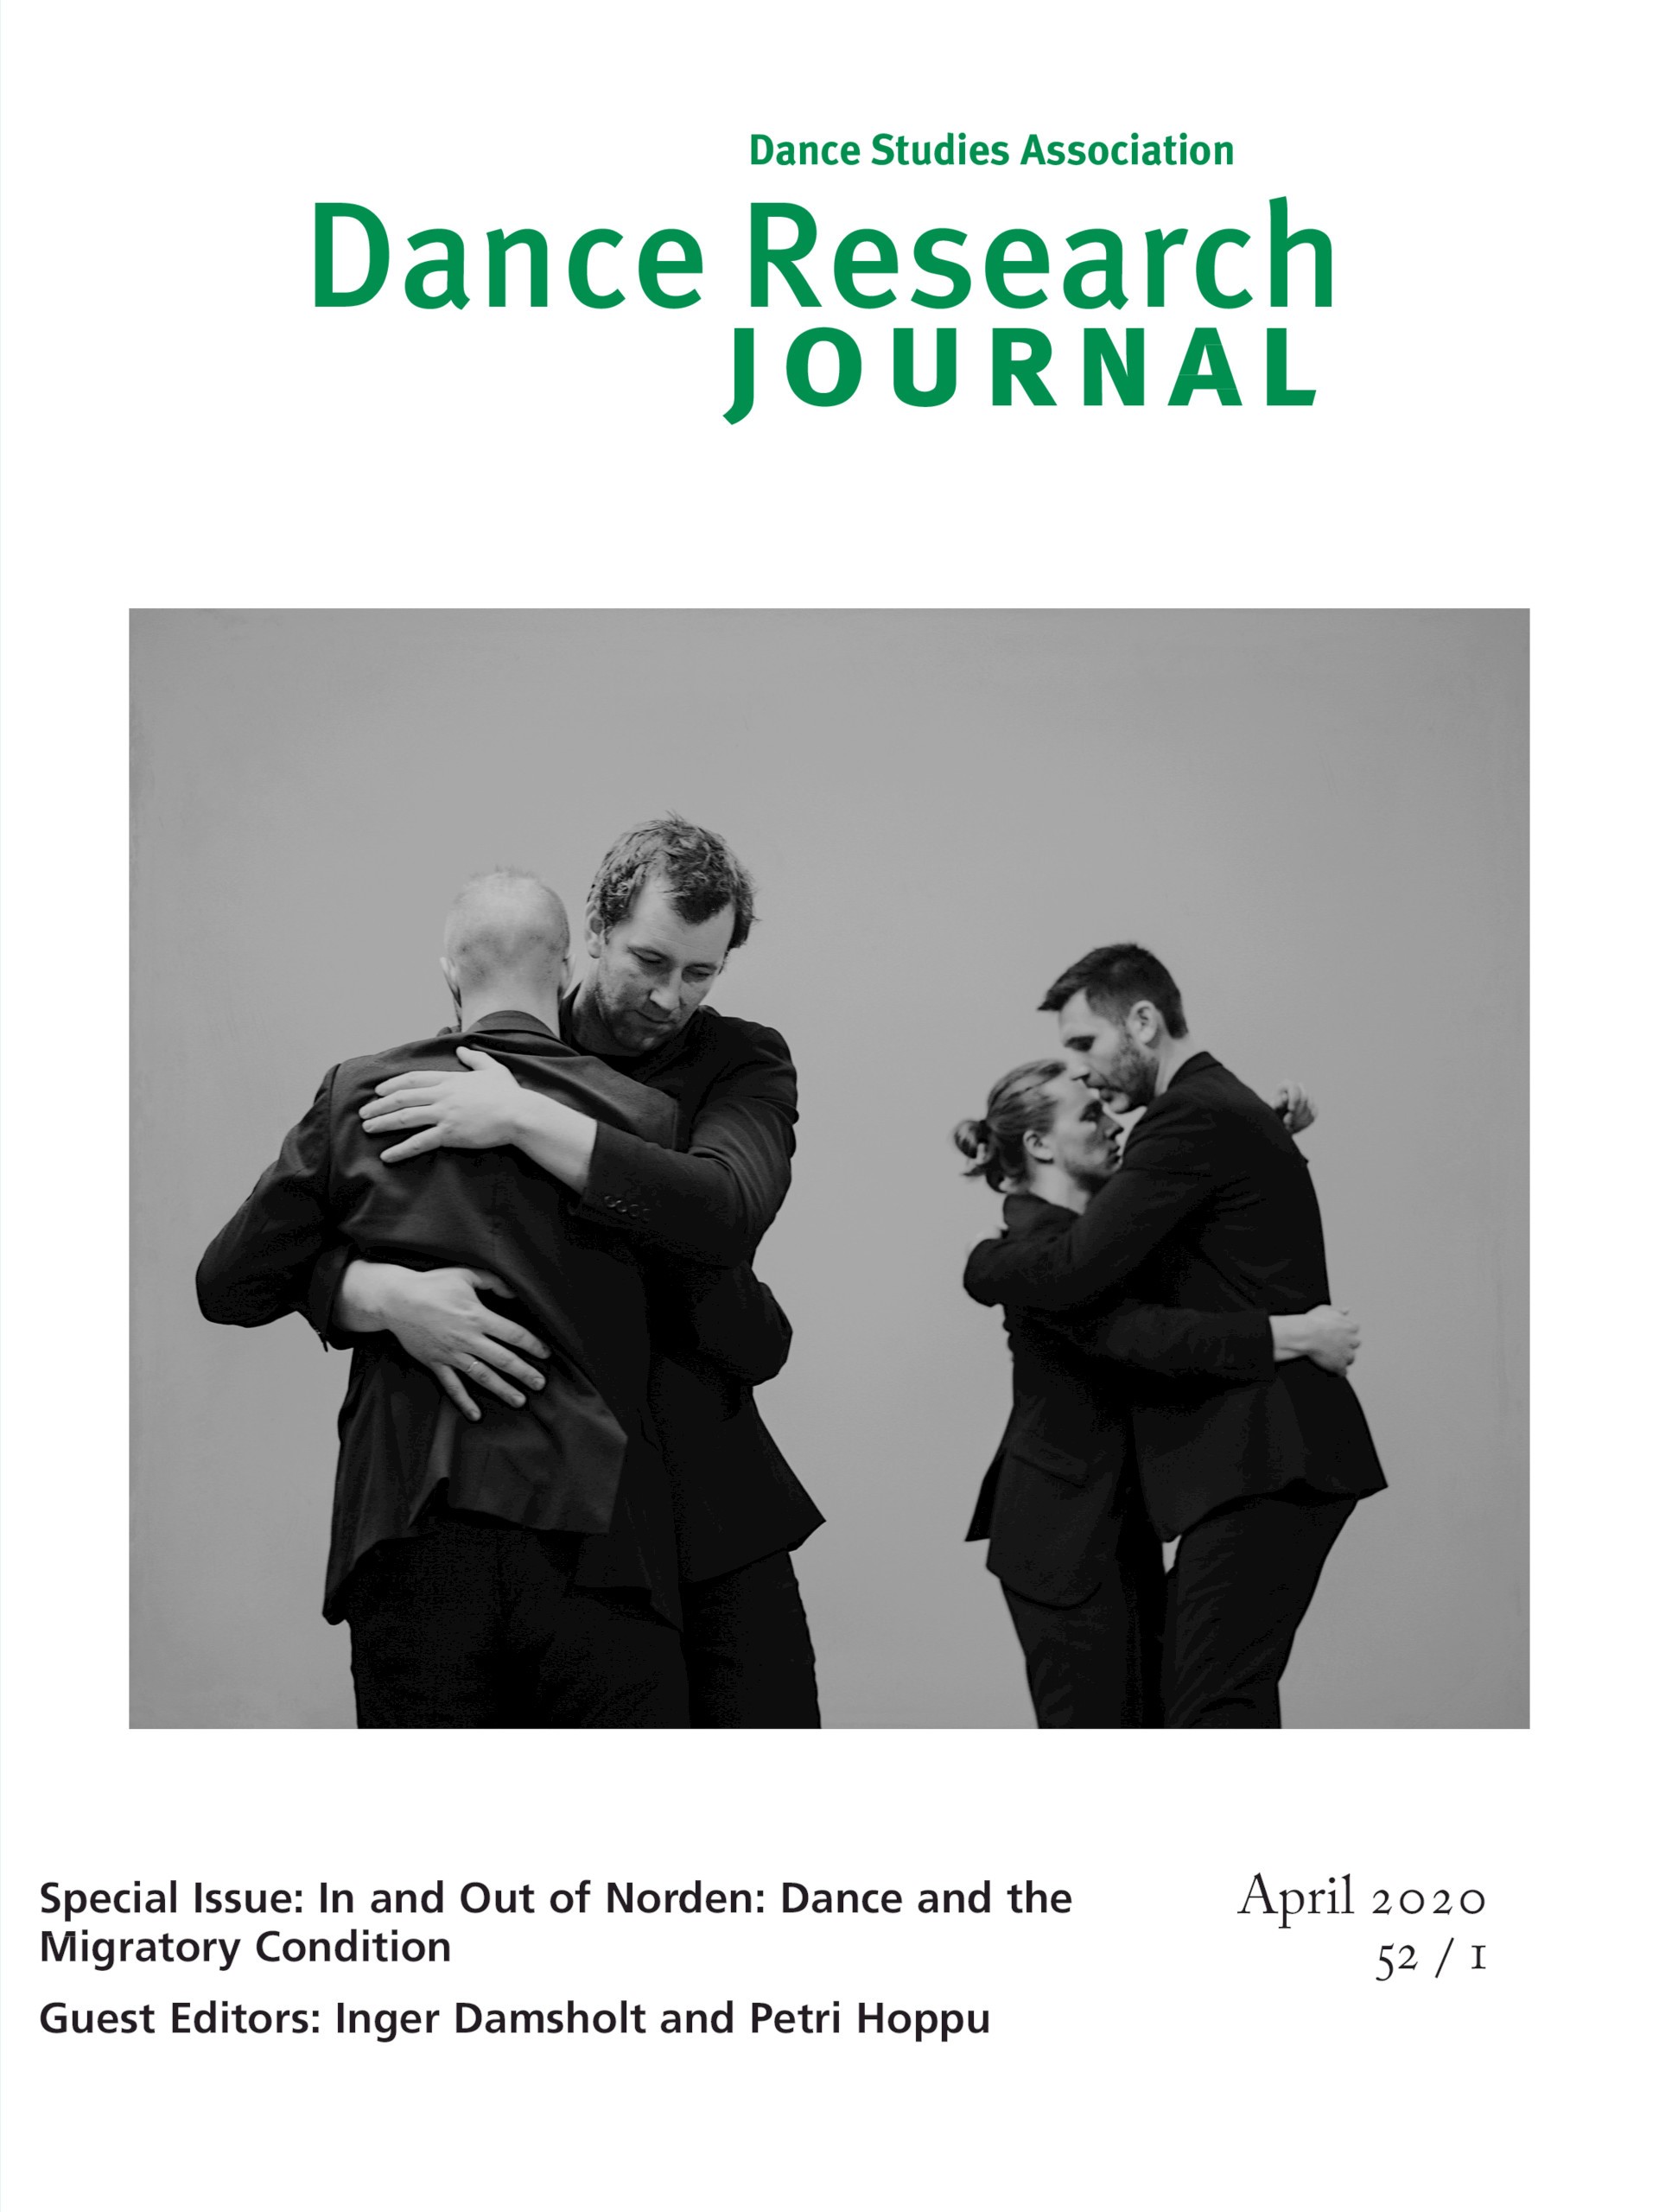 dance research journal submission guidelines